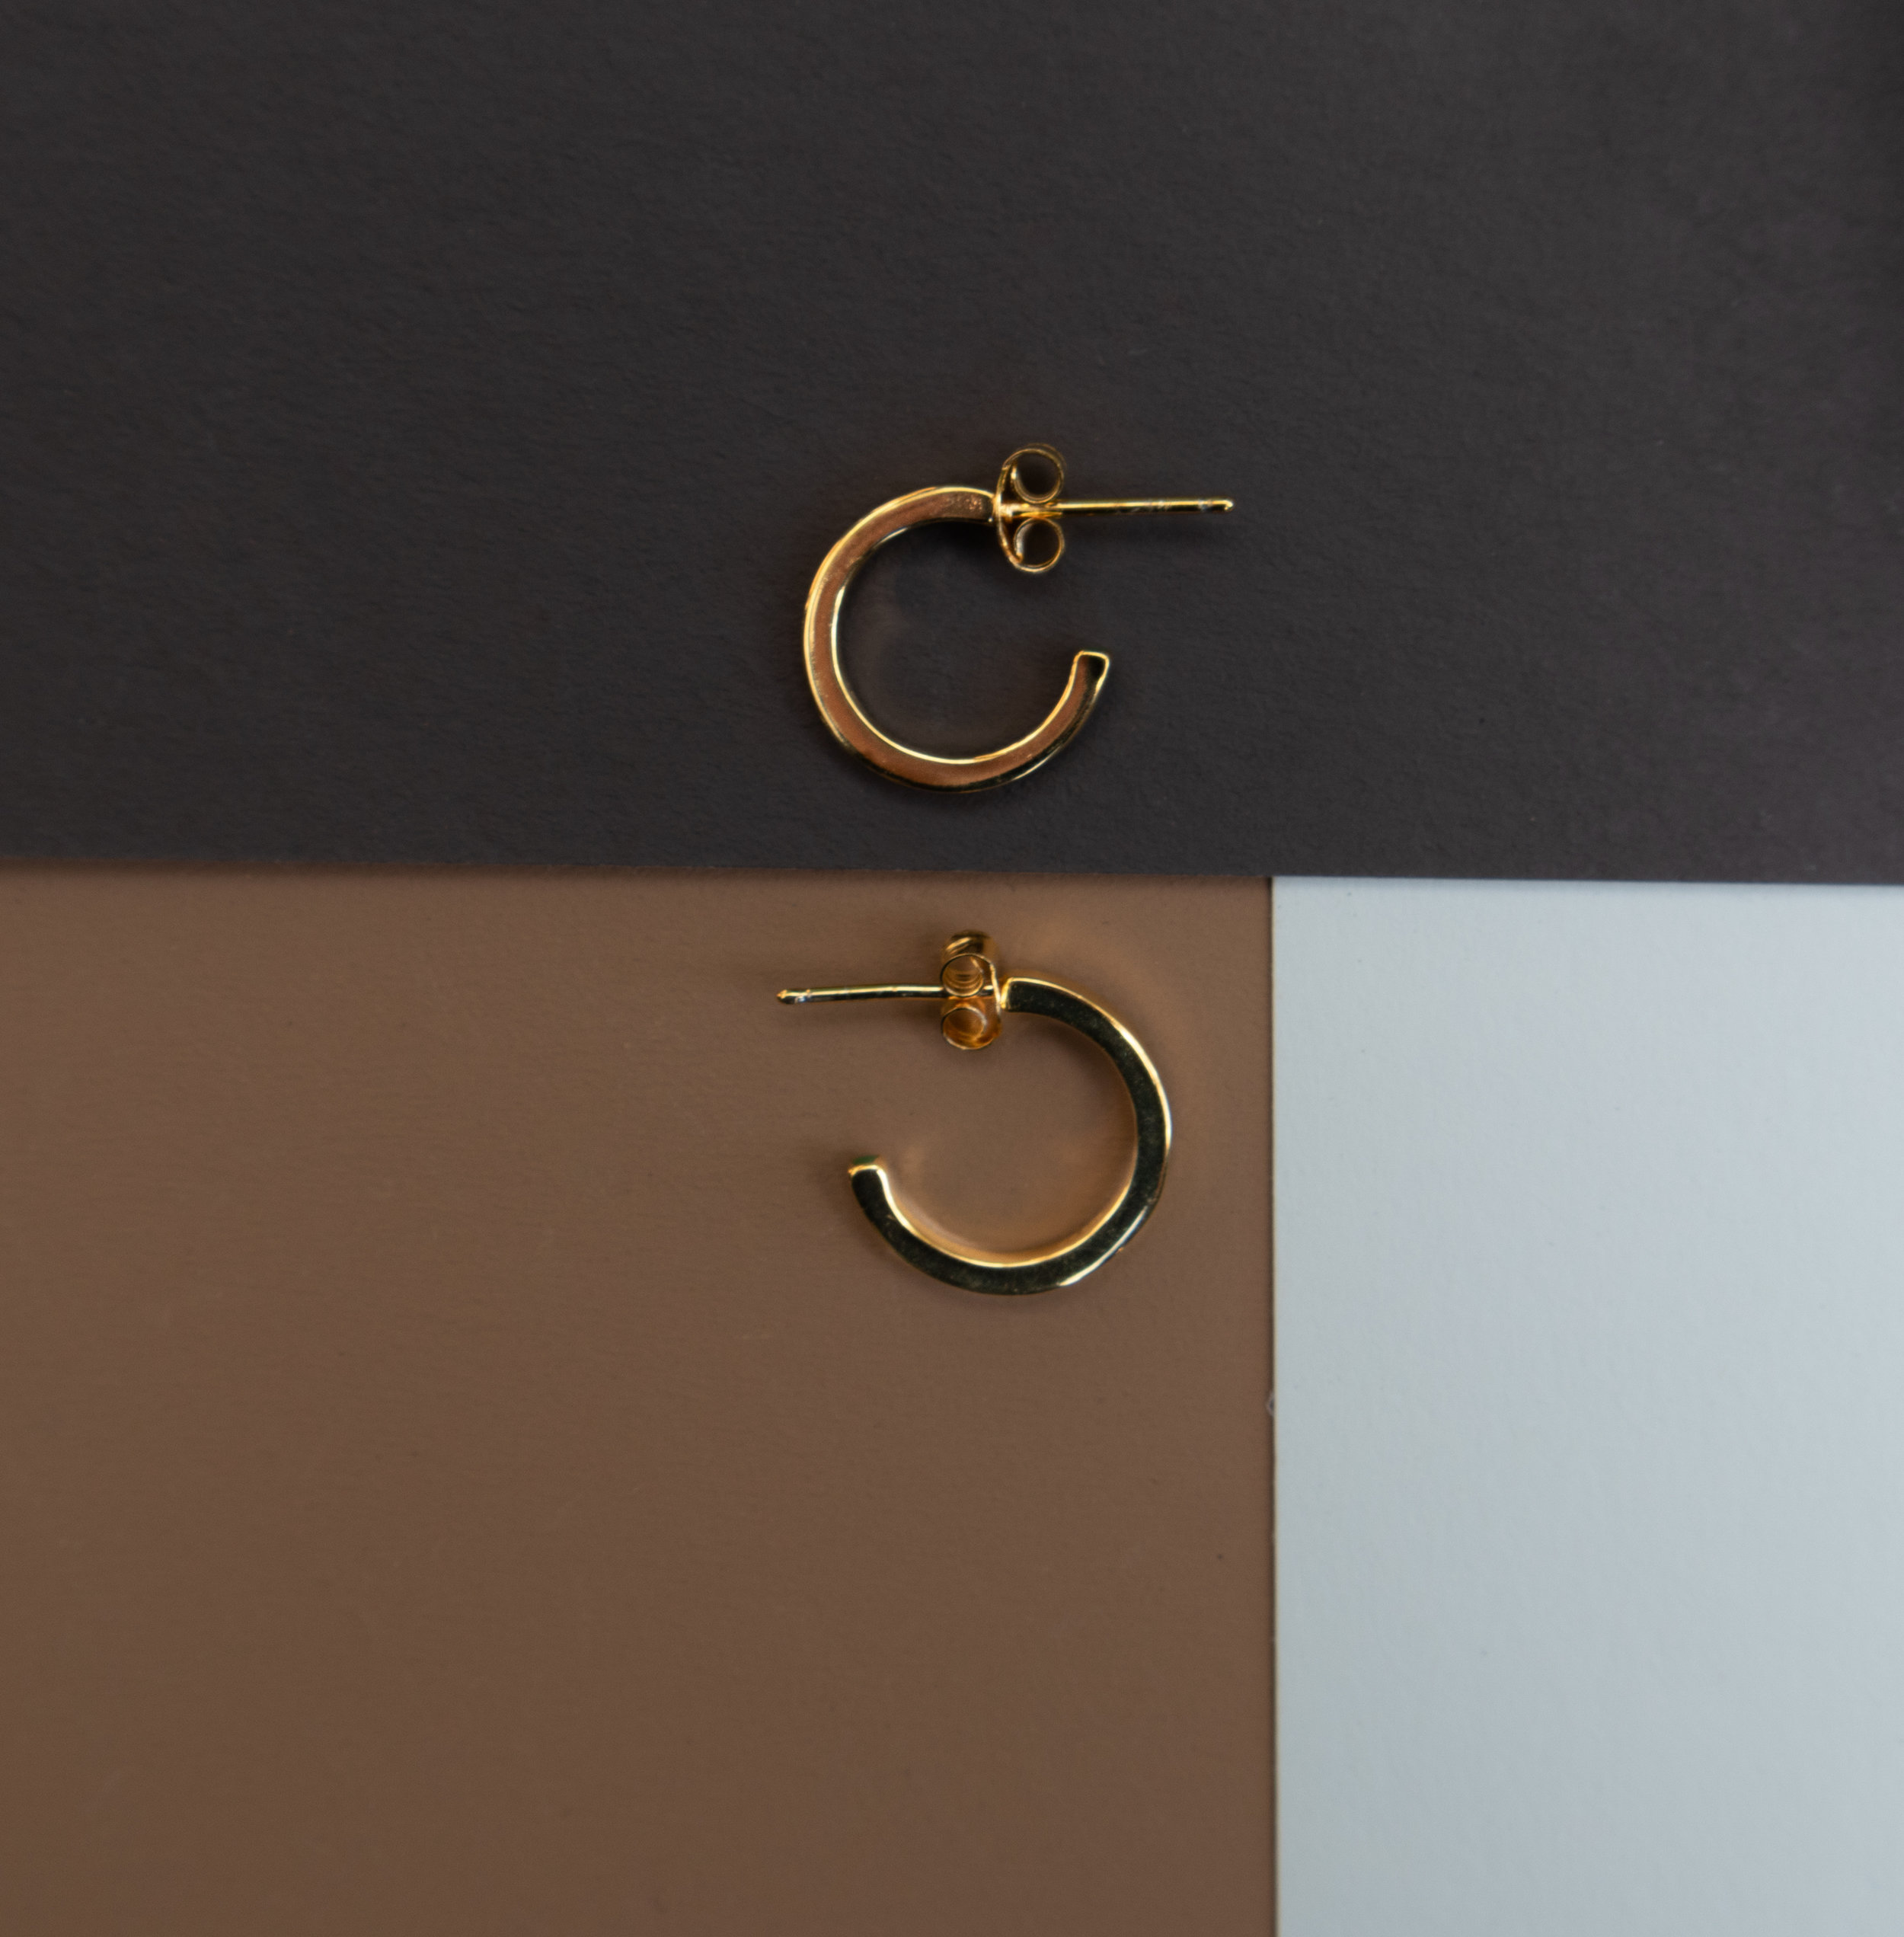 Jewerly Styling, display, retail display, Enamel Copenhagen our work for Deense Kroon new collection 10.jpg